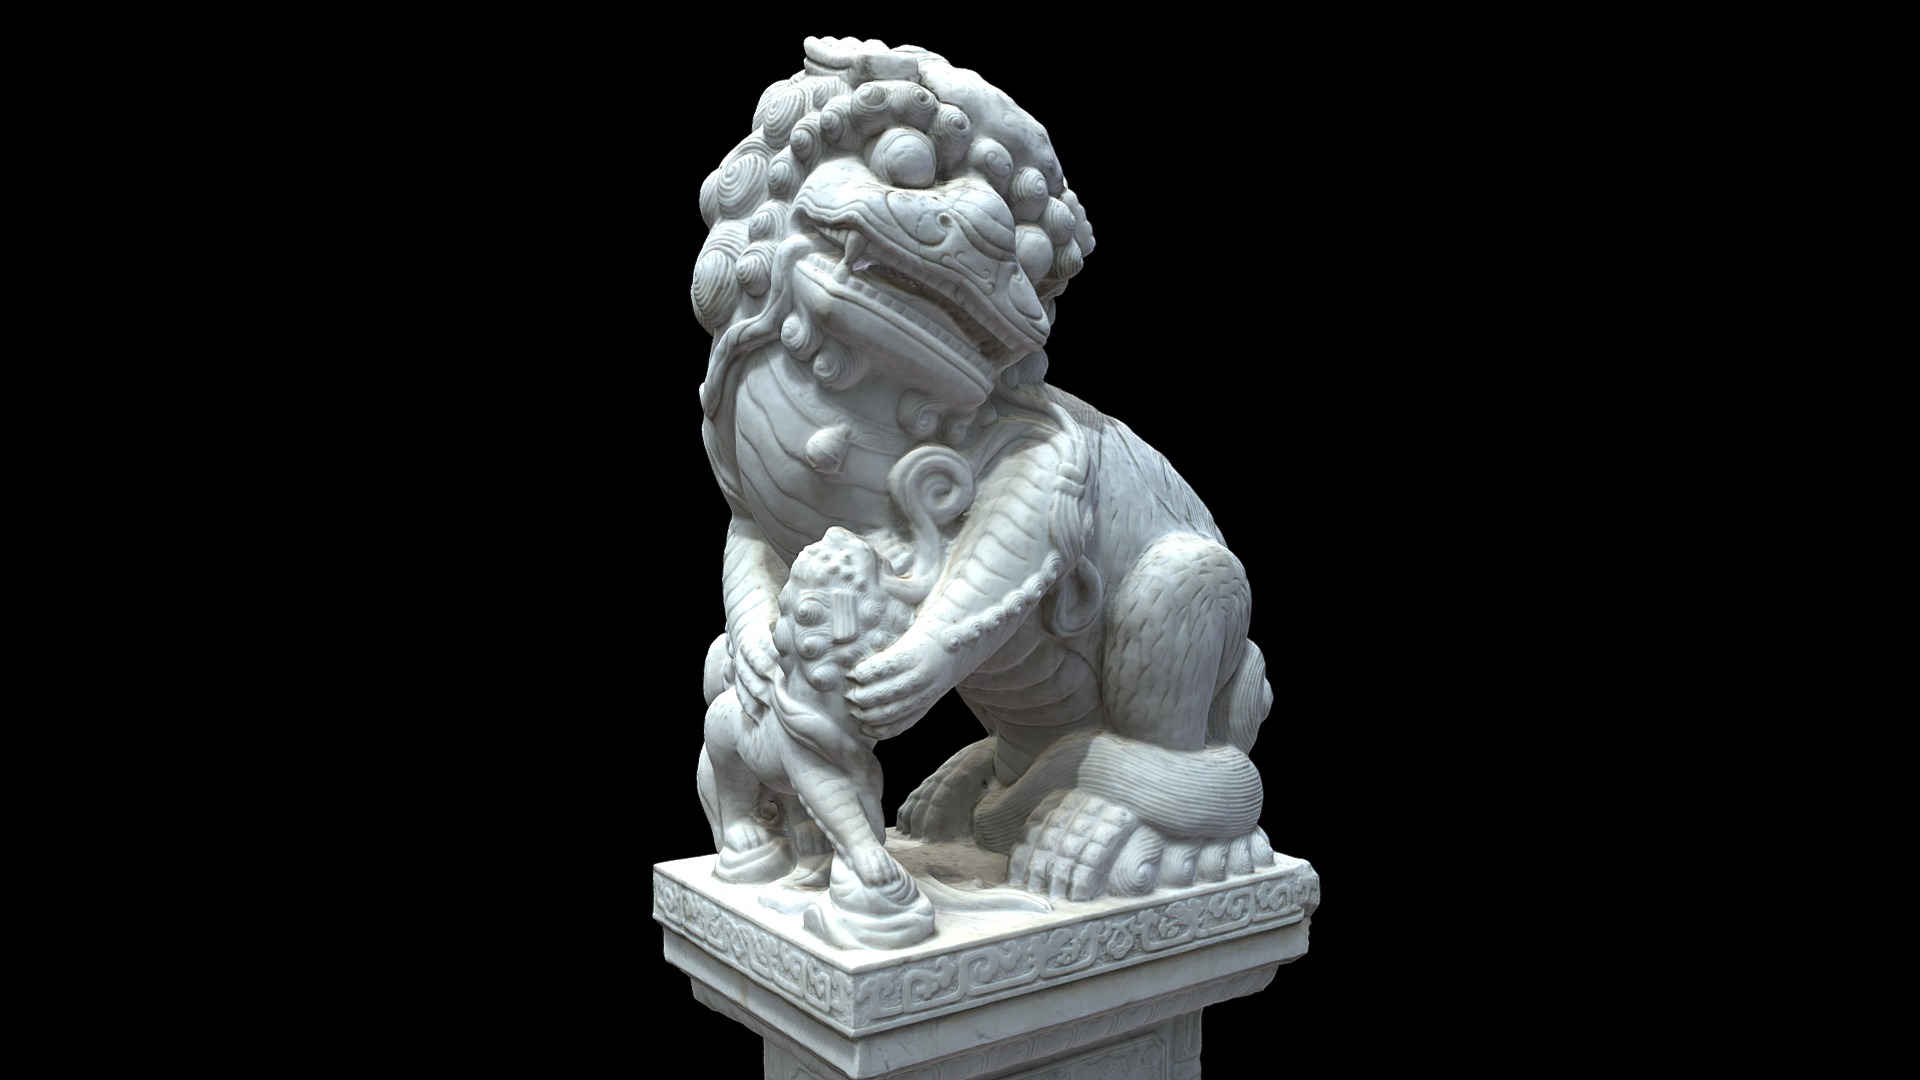 3D model 2019-10 – Hangzhou 20 - This is a 3D model of the 2019-10 - Hangzhou 20. The 3D model is about a statue of an elephant.